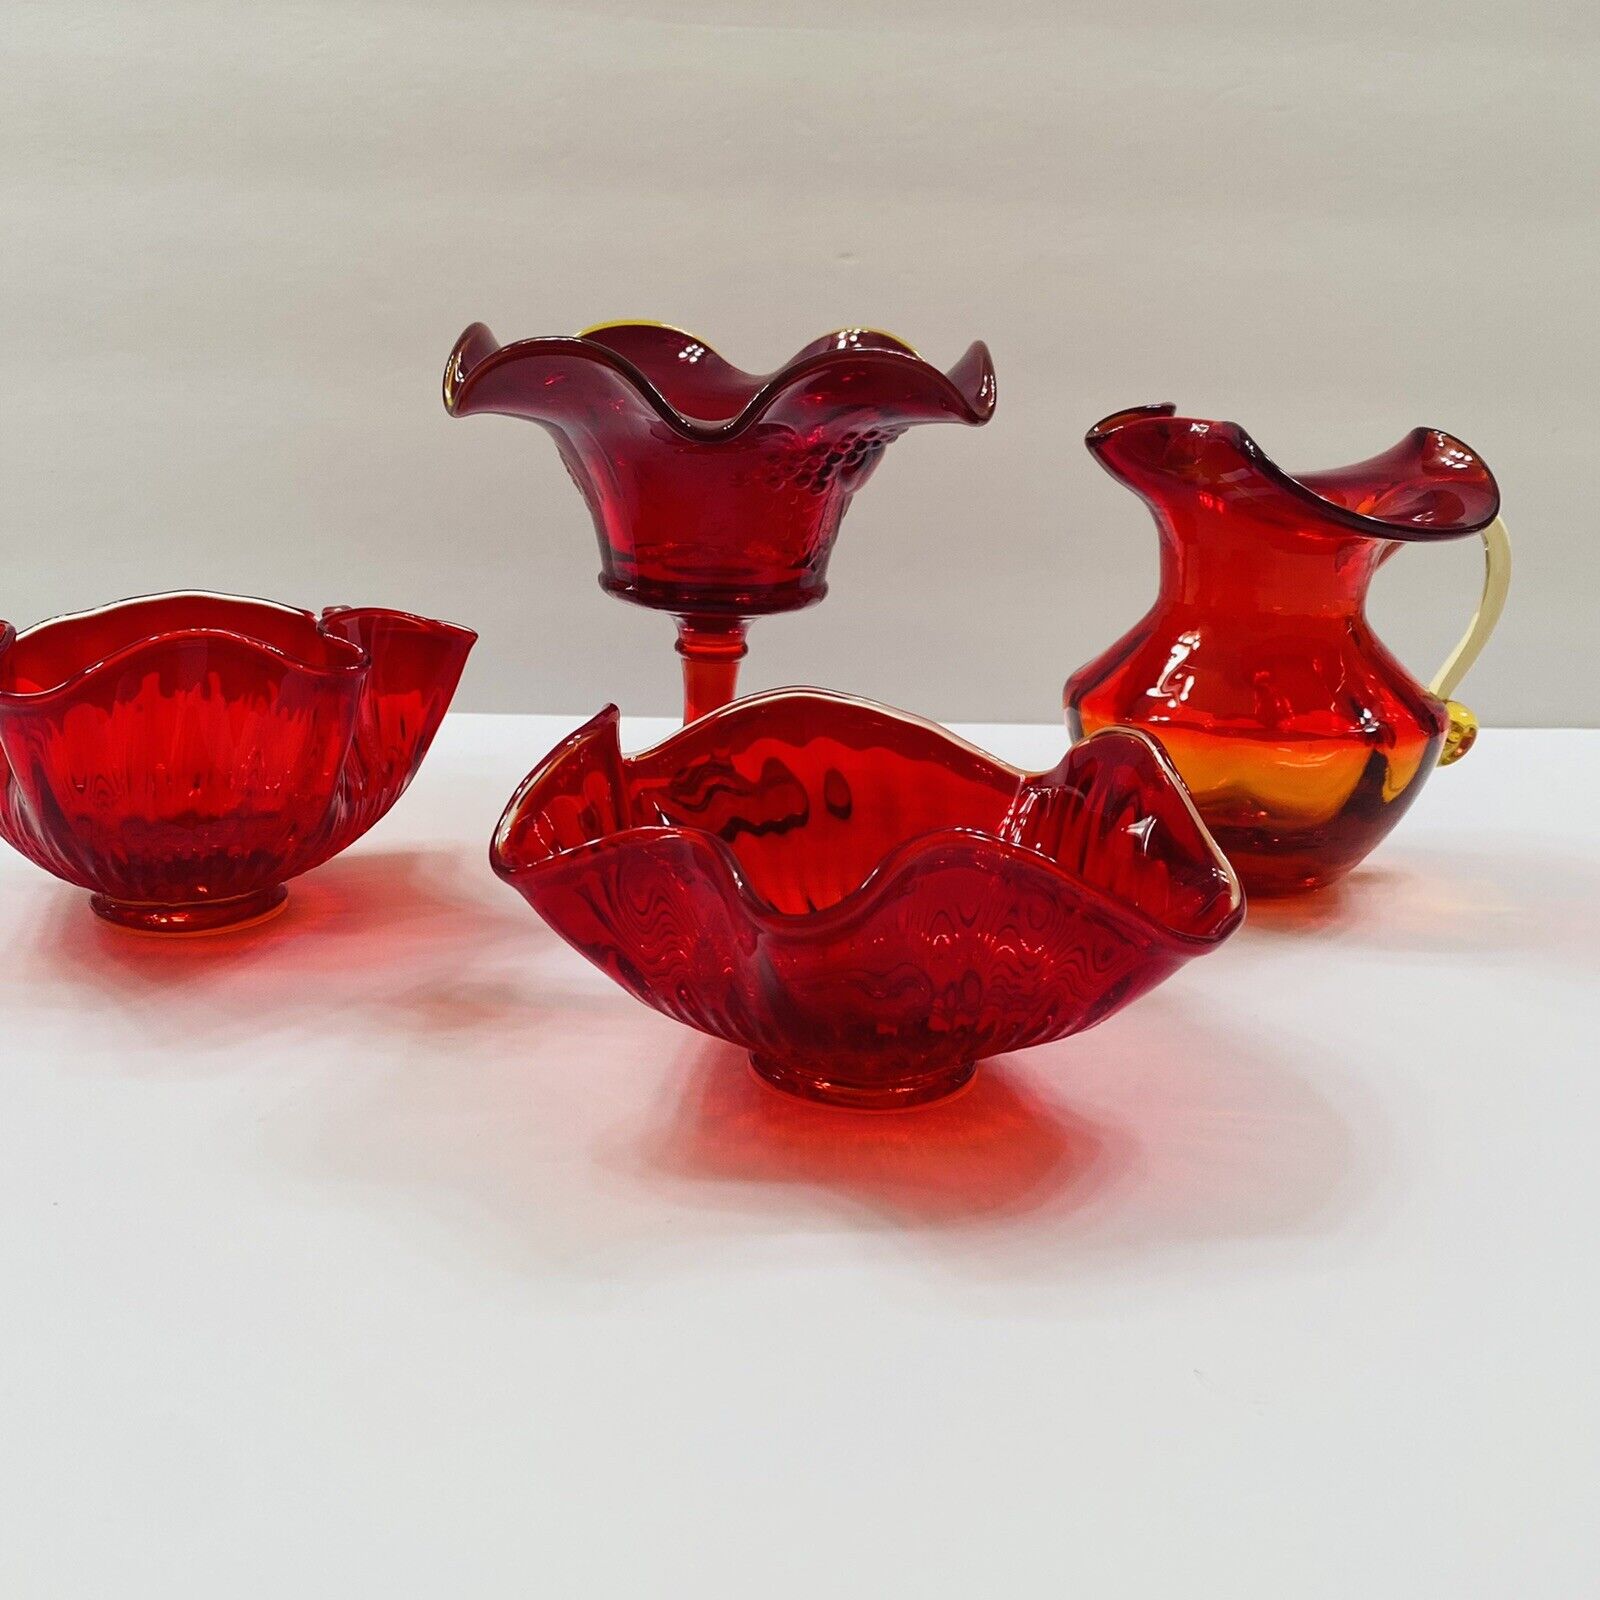 4 pcs lot Vintage Red Glass Fluted Art Candy Dish, 2 candy bowls, pitcher